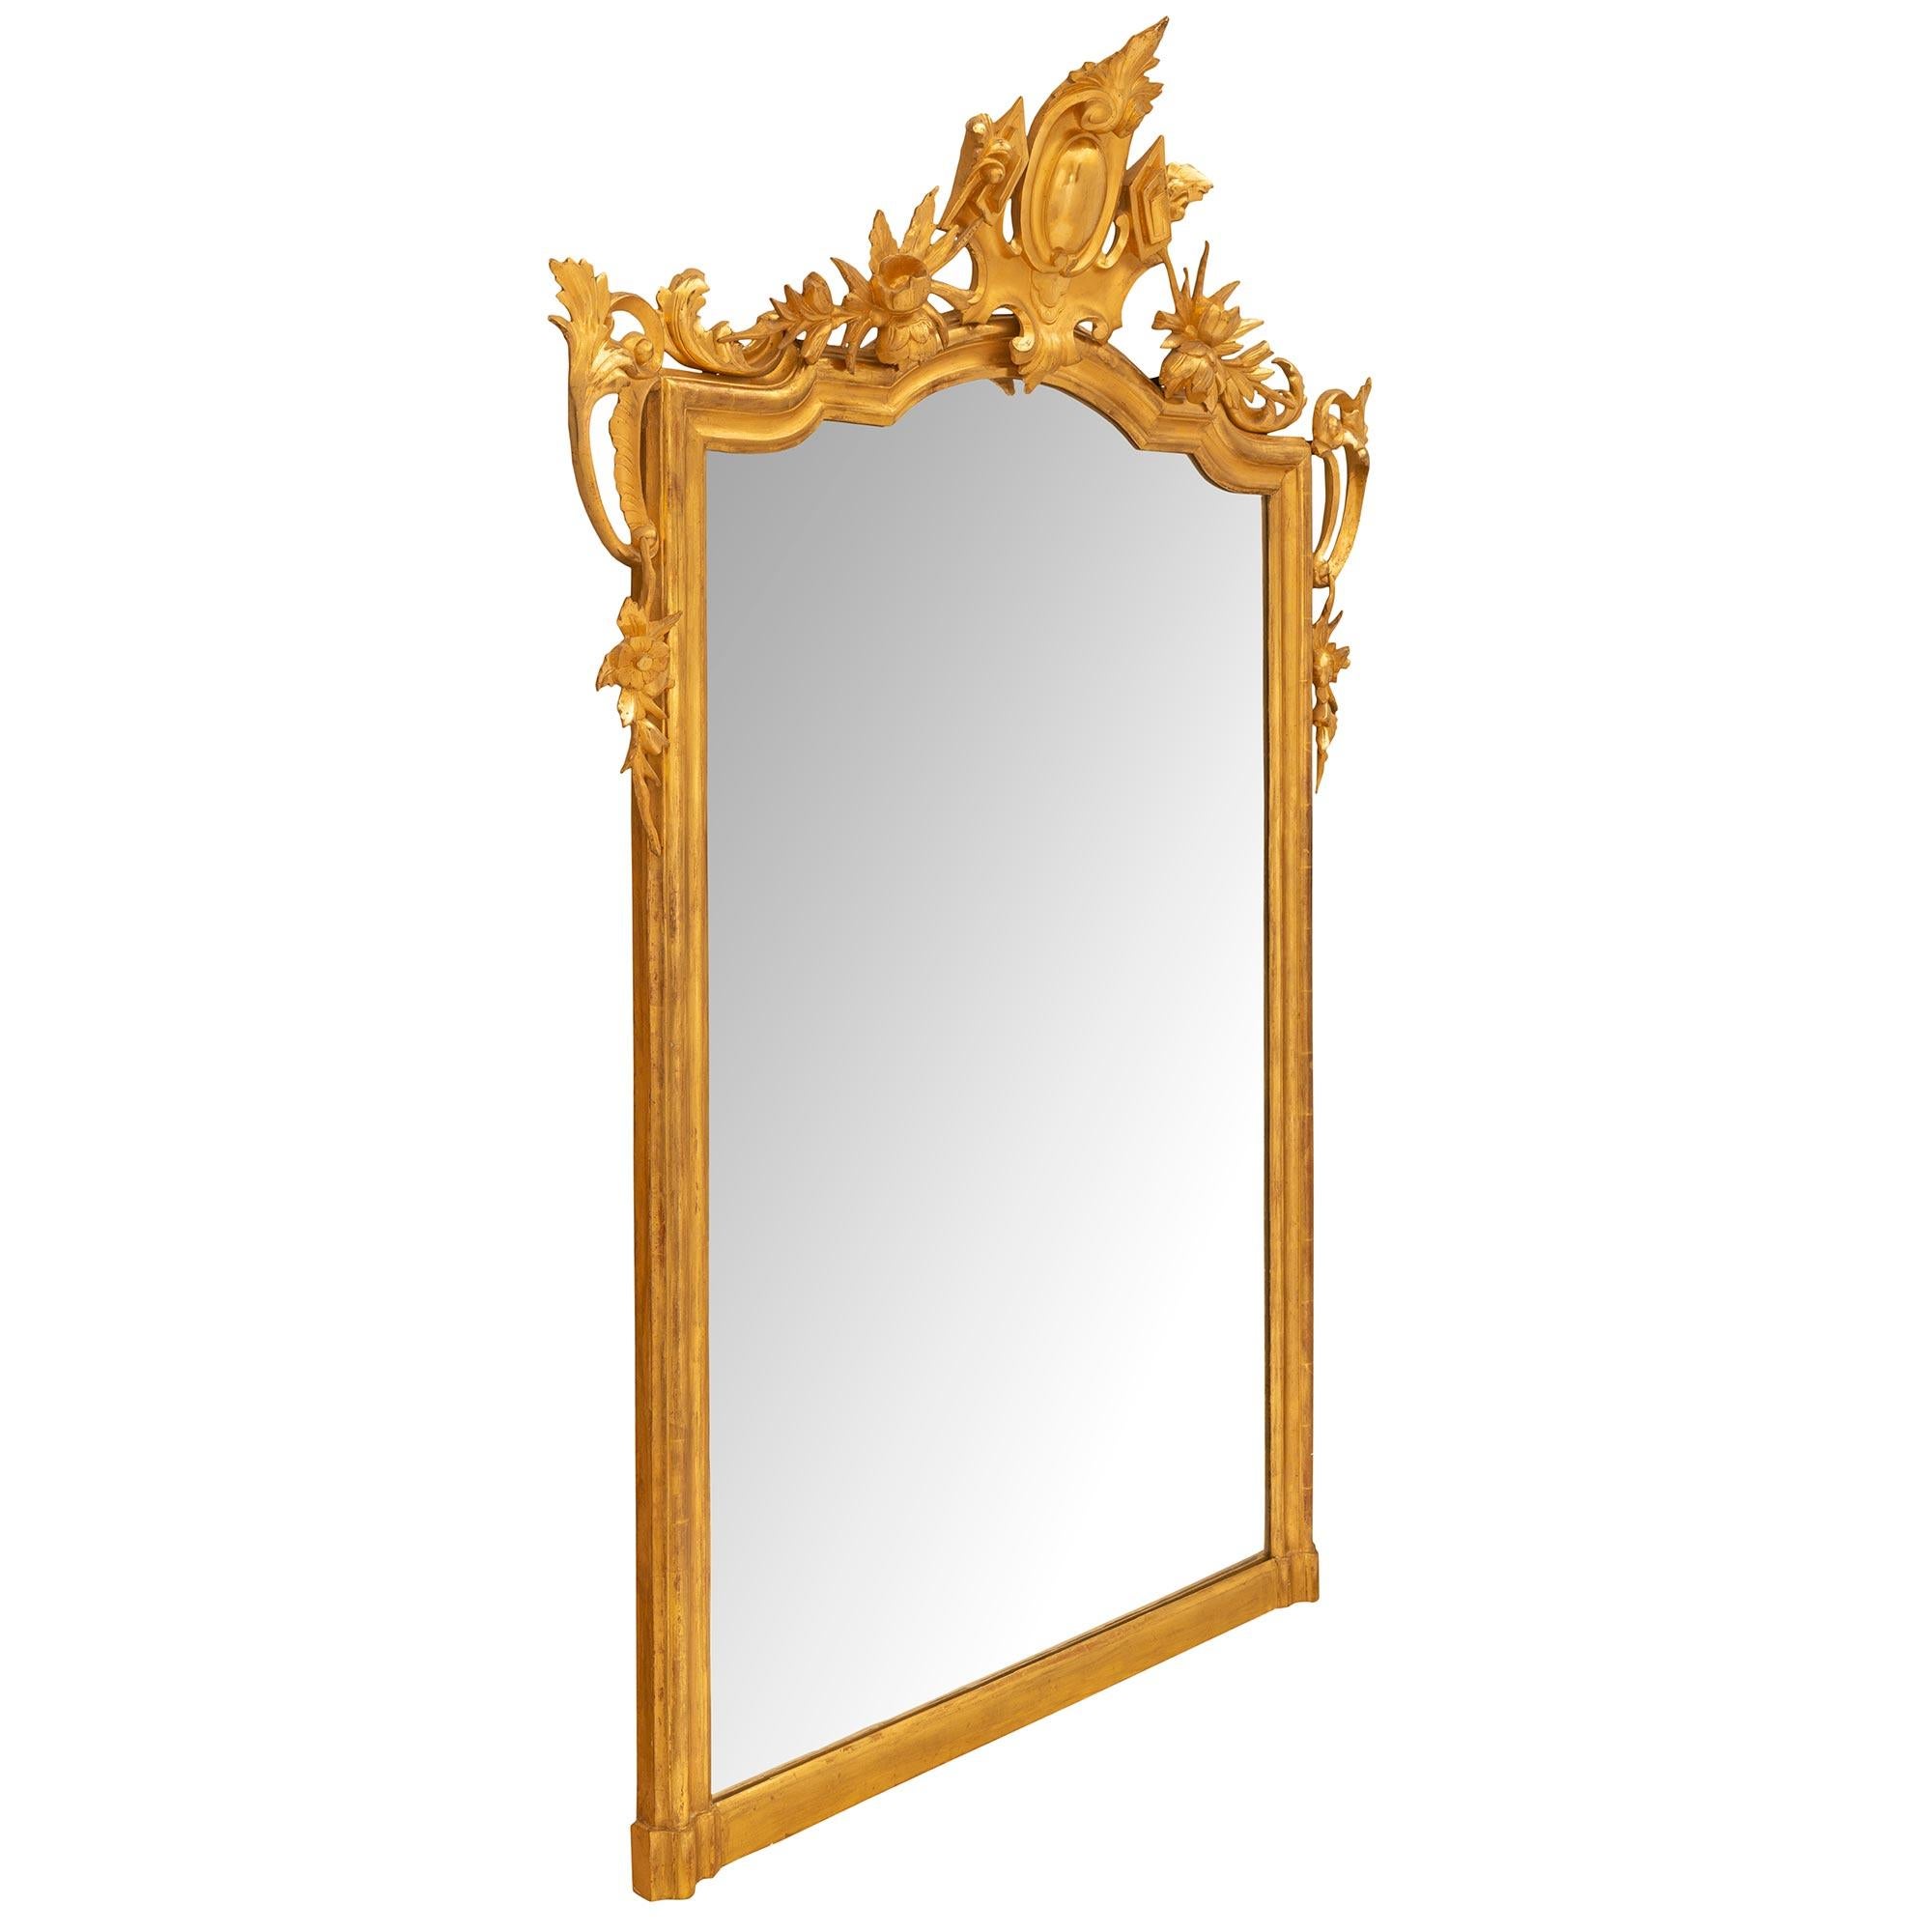 Pair of Italian 19th Century Louis XV Style Giltwood Mirrors In Good Condition For Sale In West Palm Beach, FL